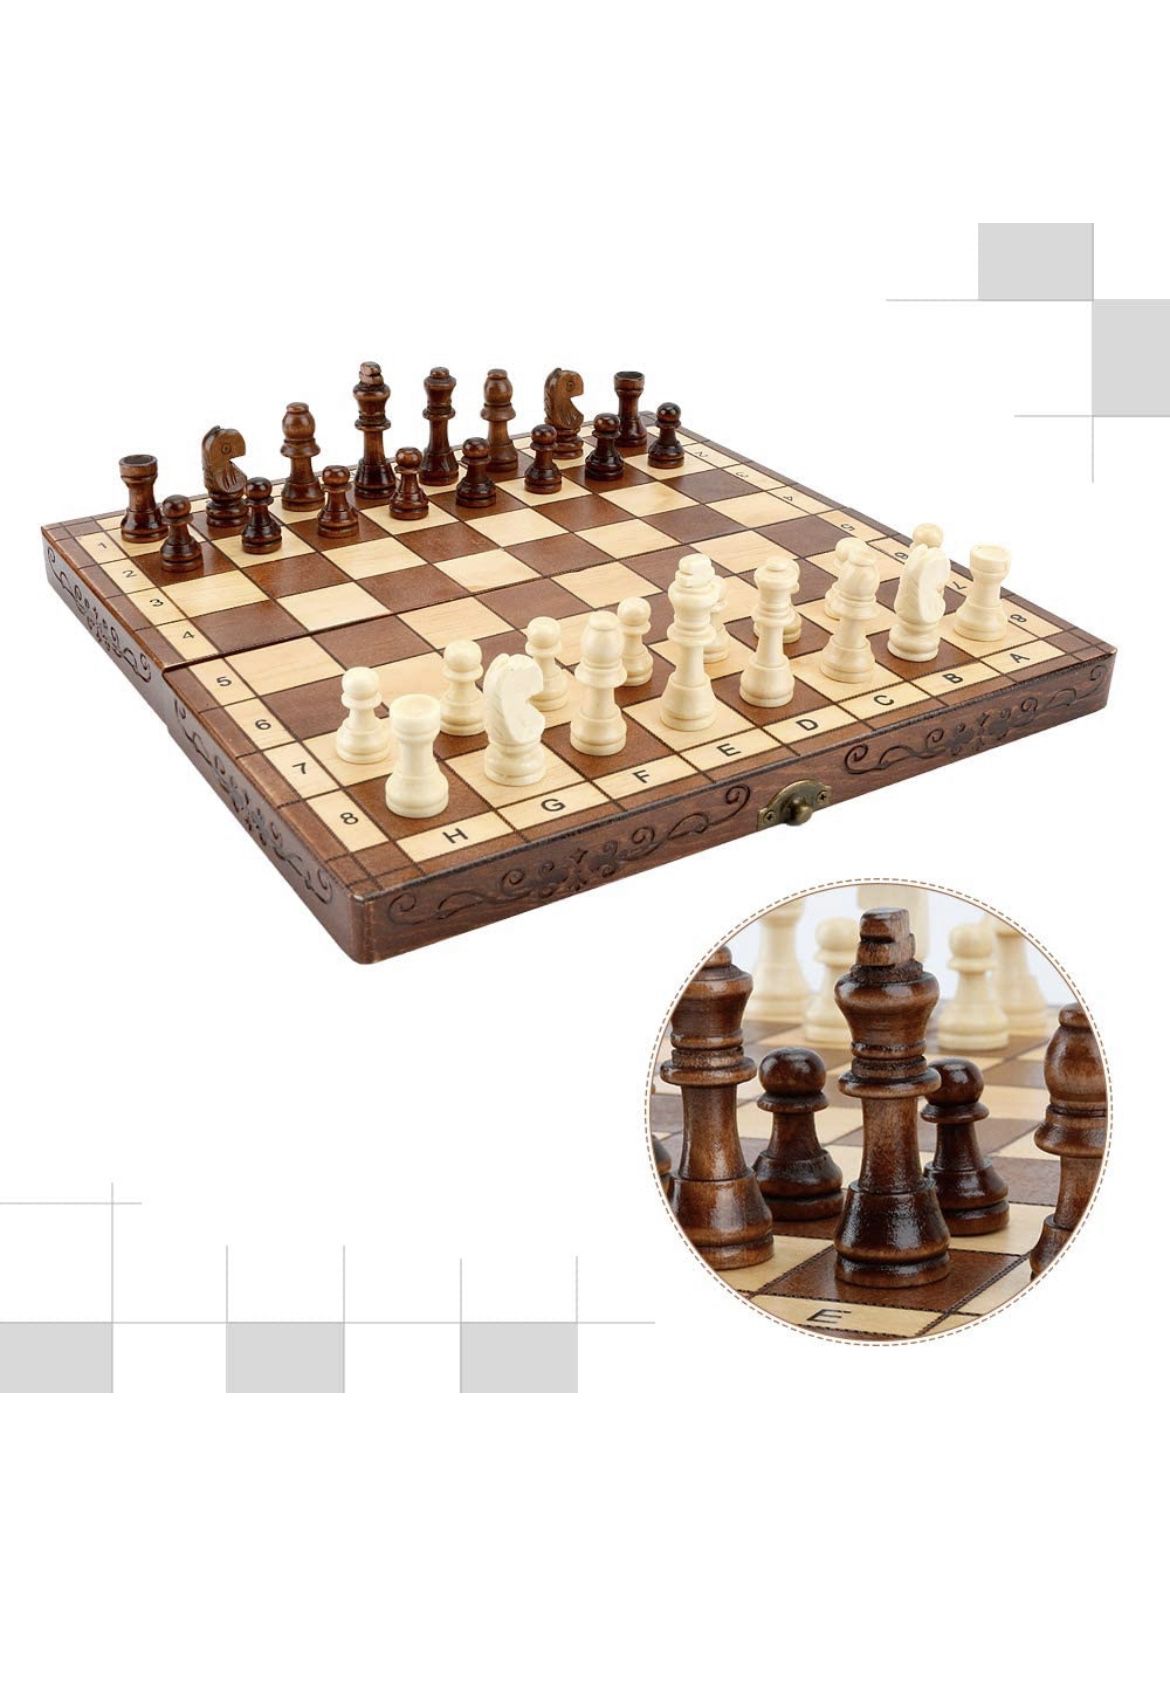 Folding Hand Crafted Wooden Chess Set Chess Board for Kids and Adults 30 x 30 cm